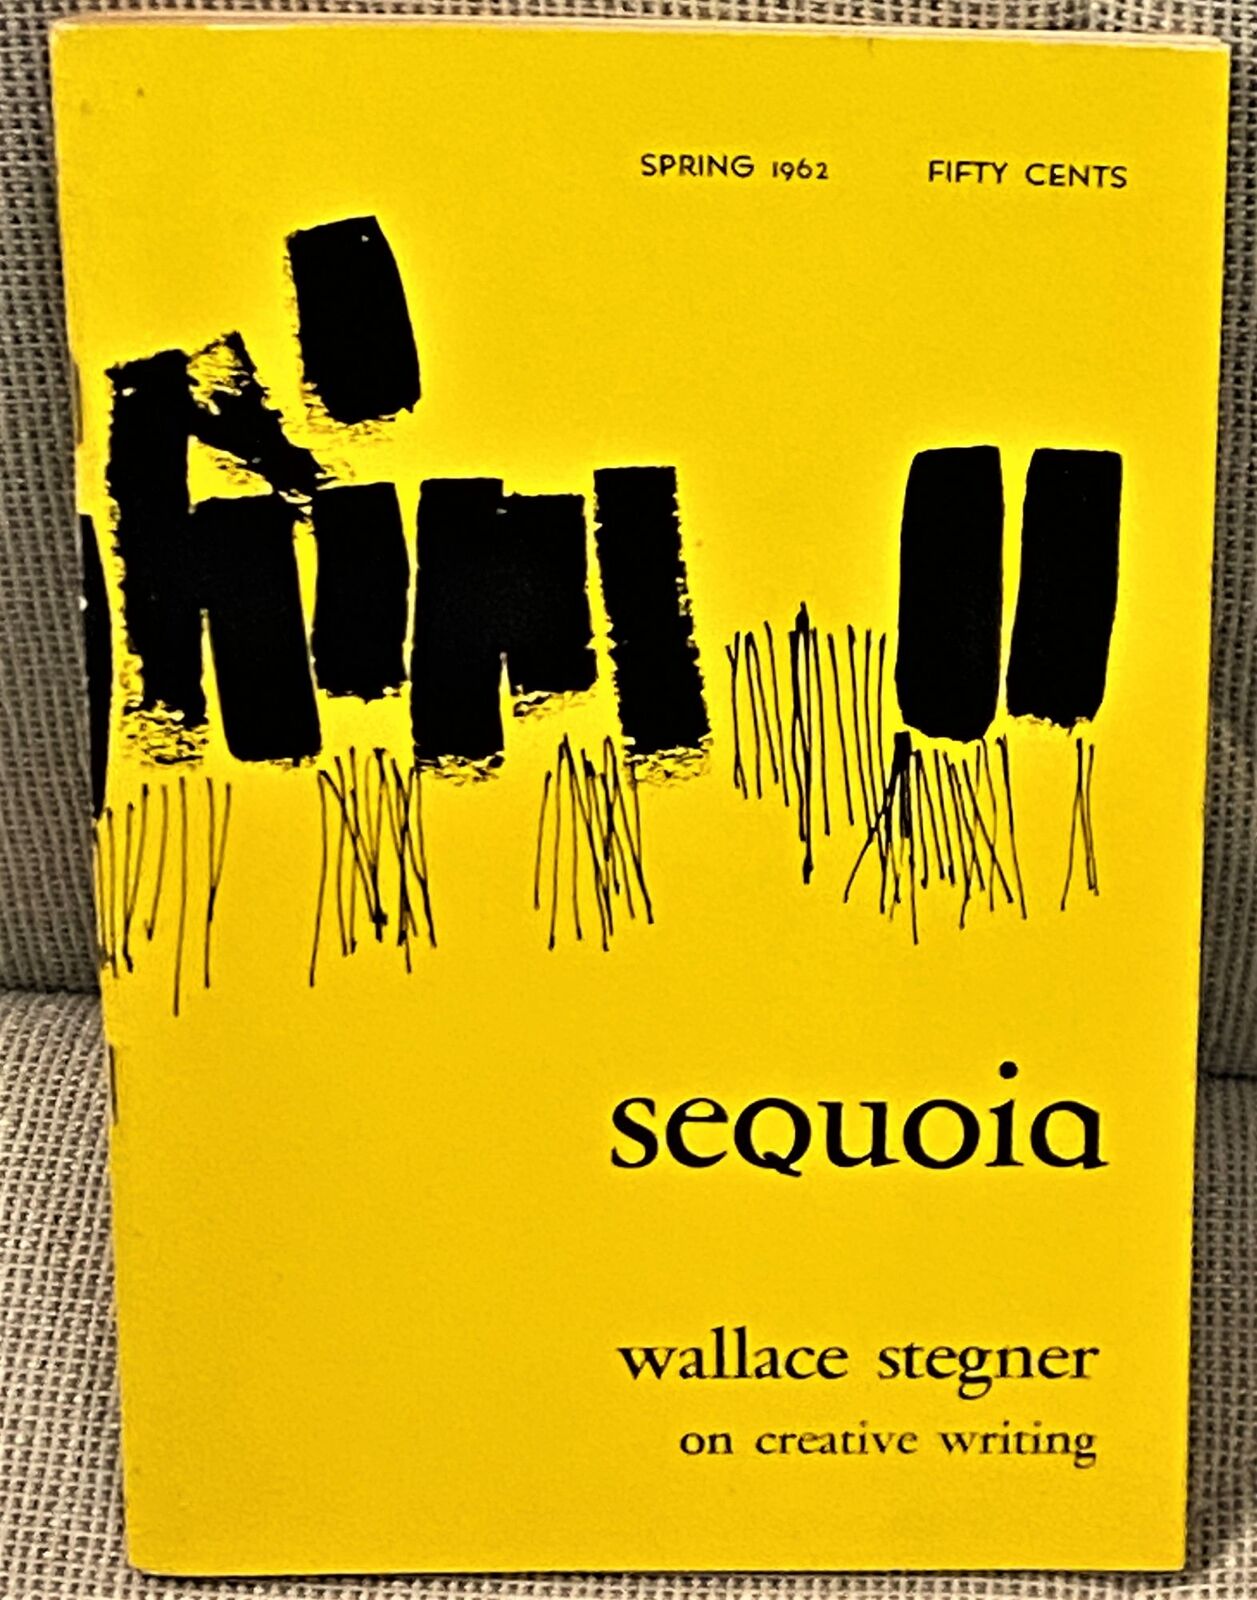 SEQUOIA SPRING 1962 WALLACE STEGNER ON CREATIVE WRITING